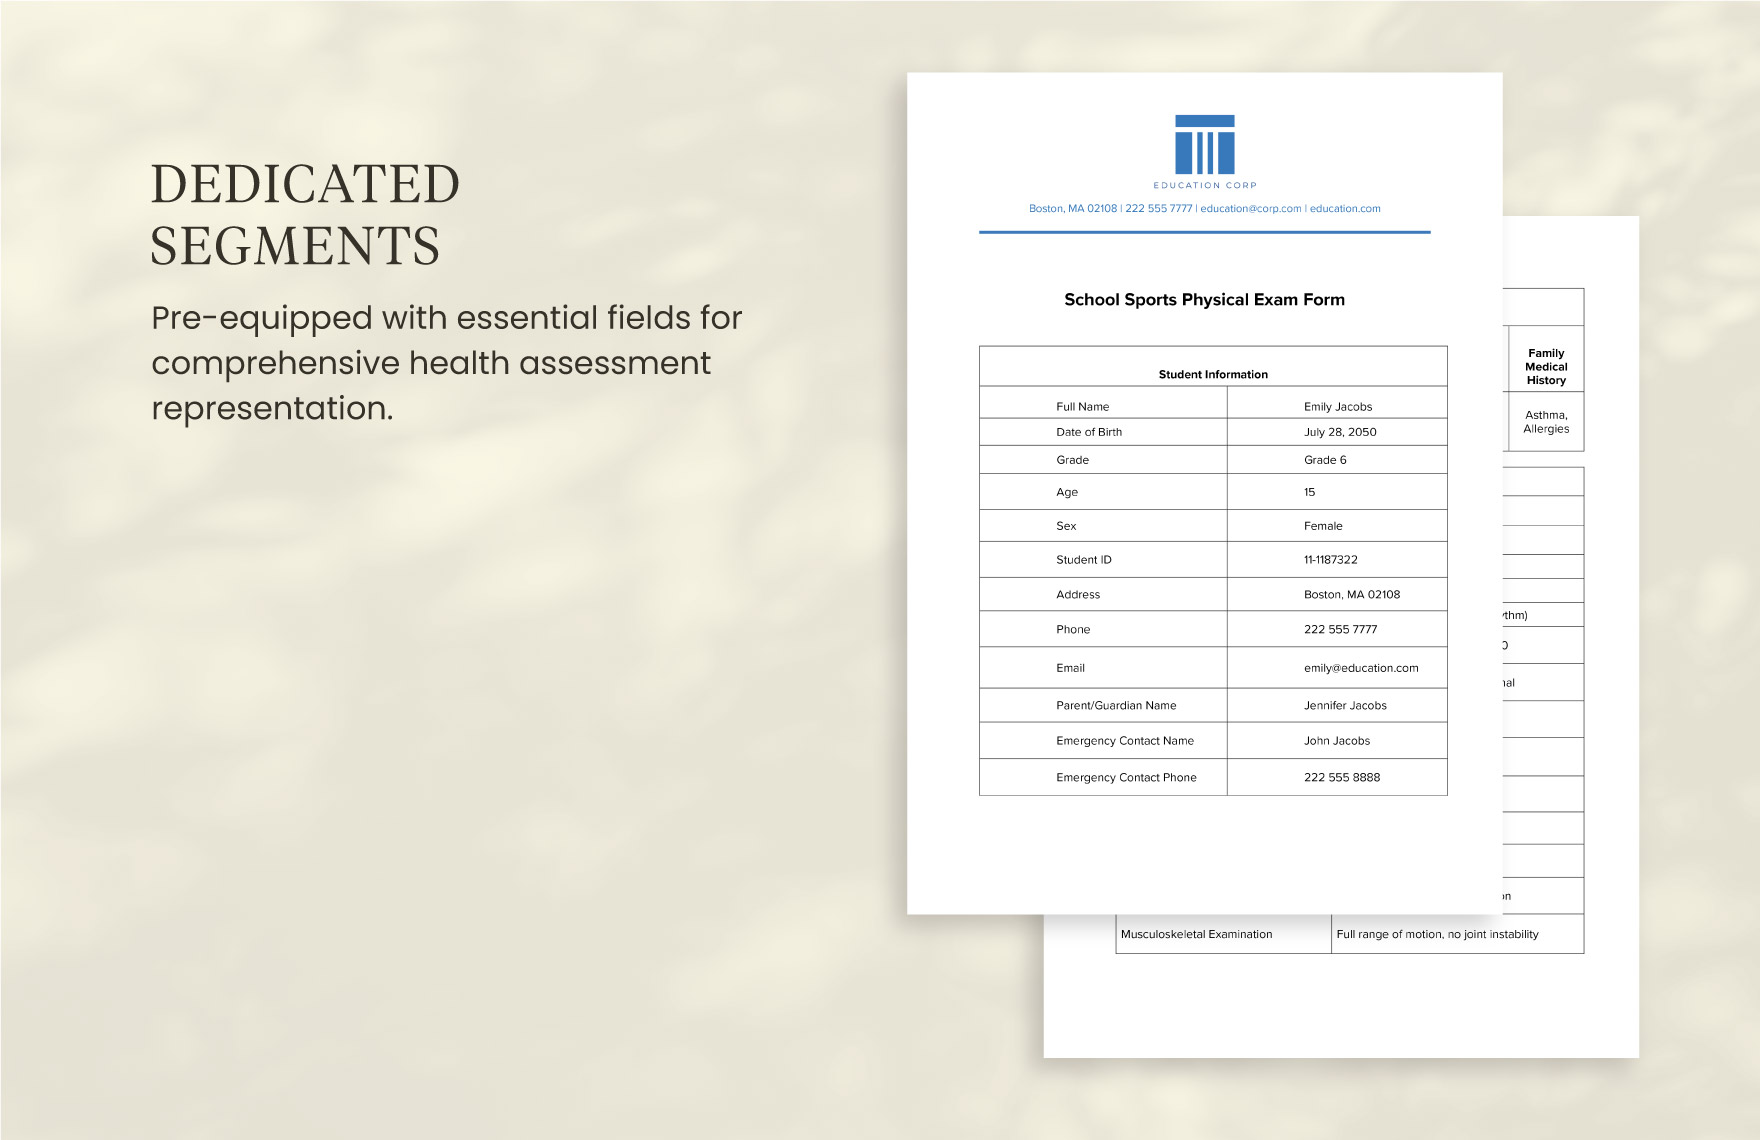 School Sports Physical Exam Form Template